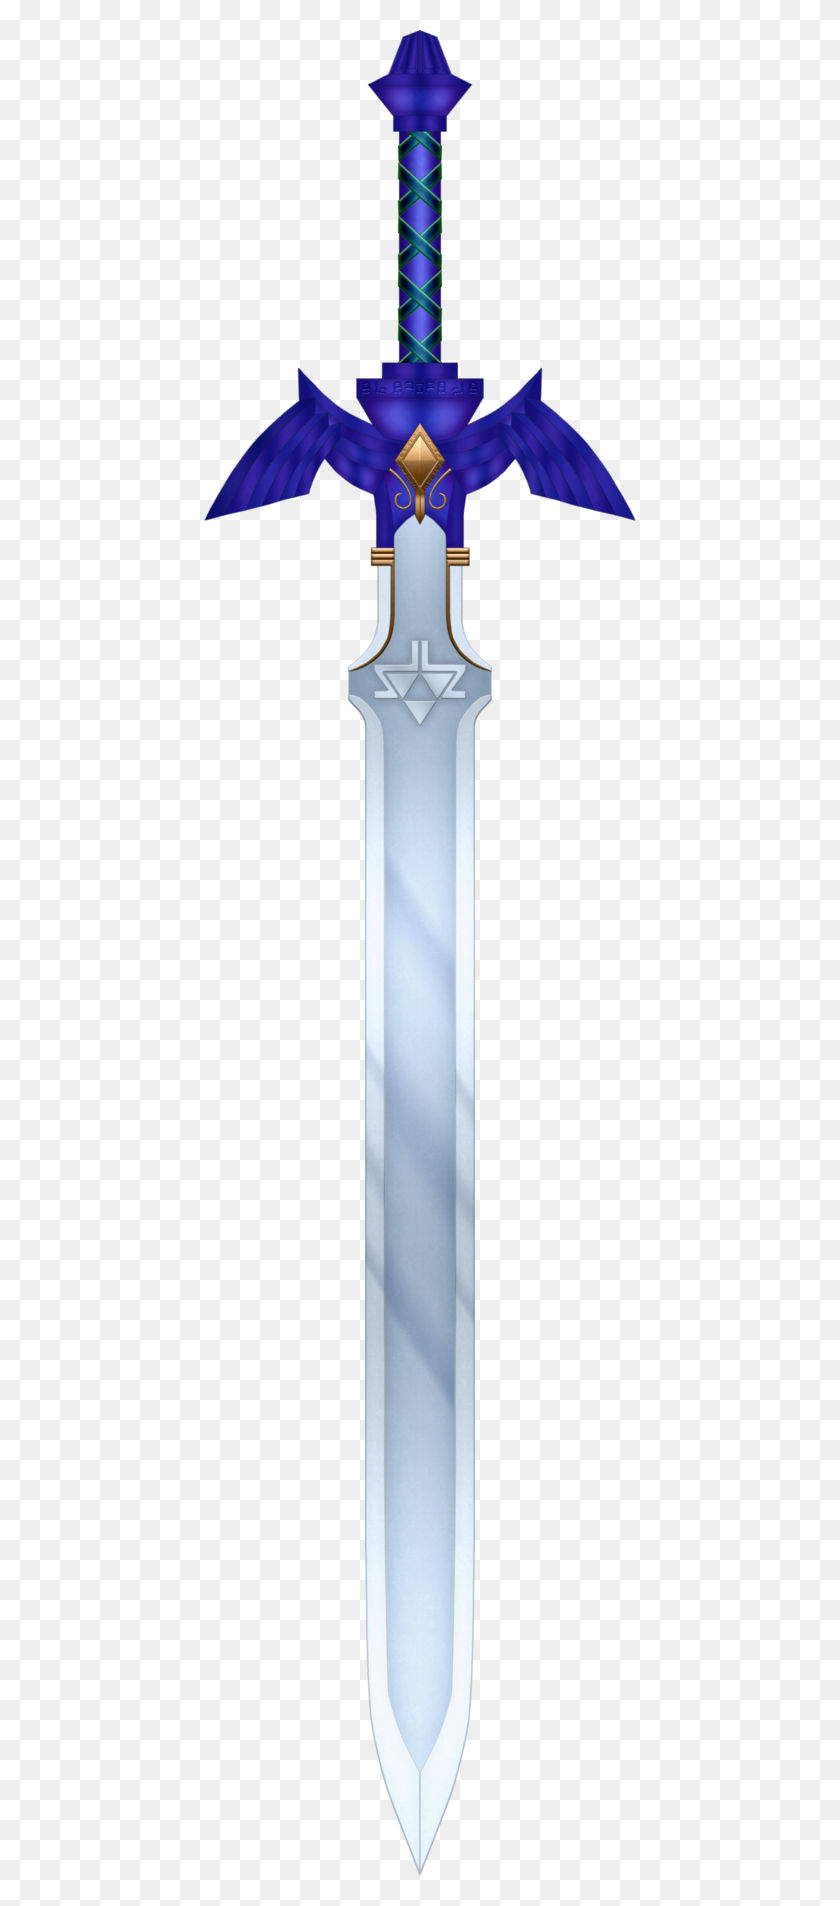 432x1846 Like With The Hylian Shield, The Master Sword Is Mostly The Same - Hylian Shield PNG